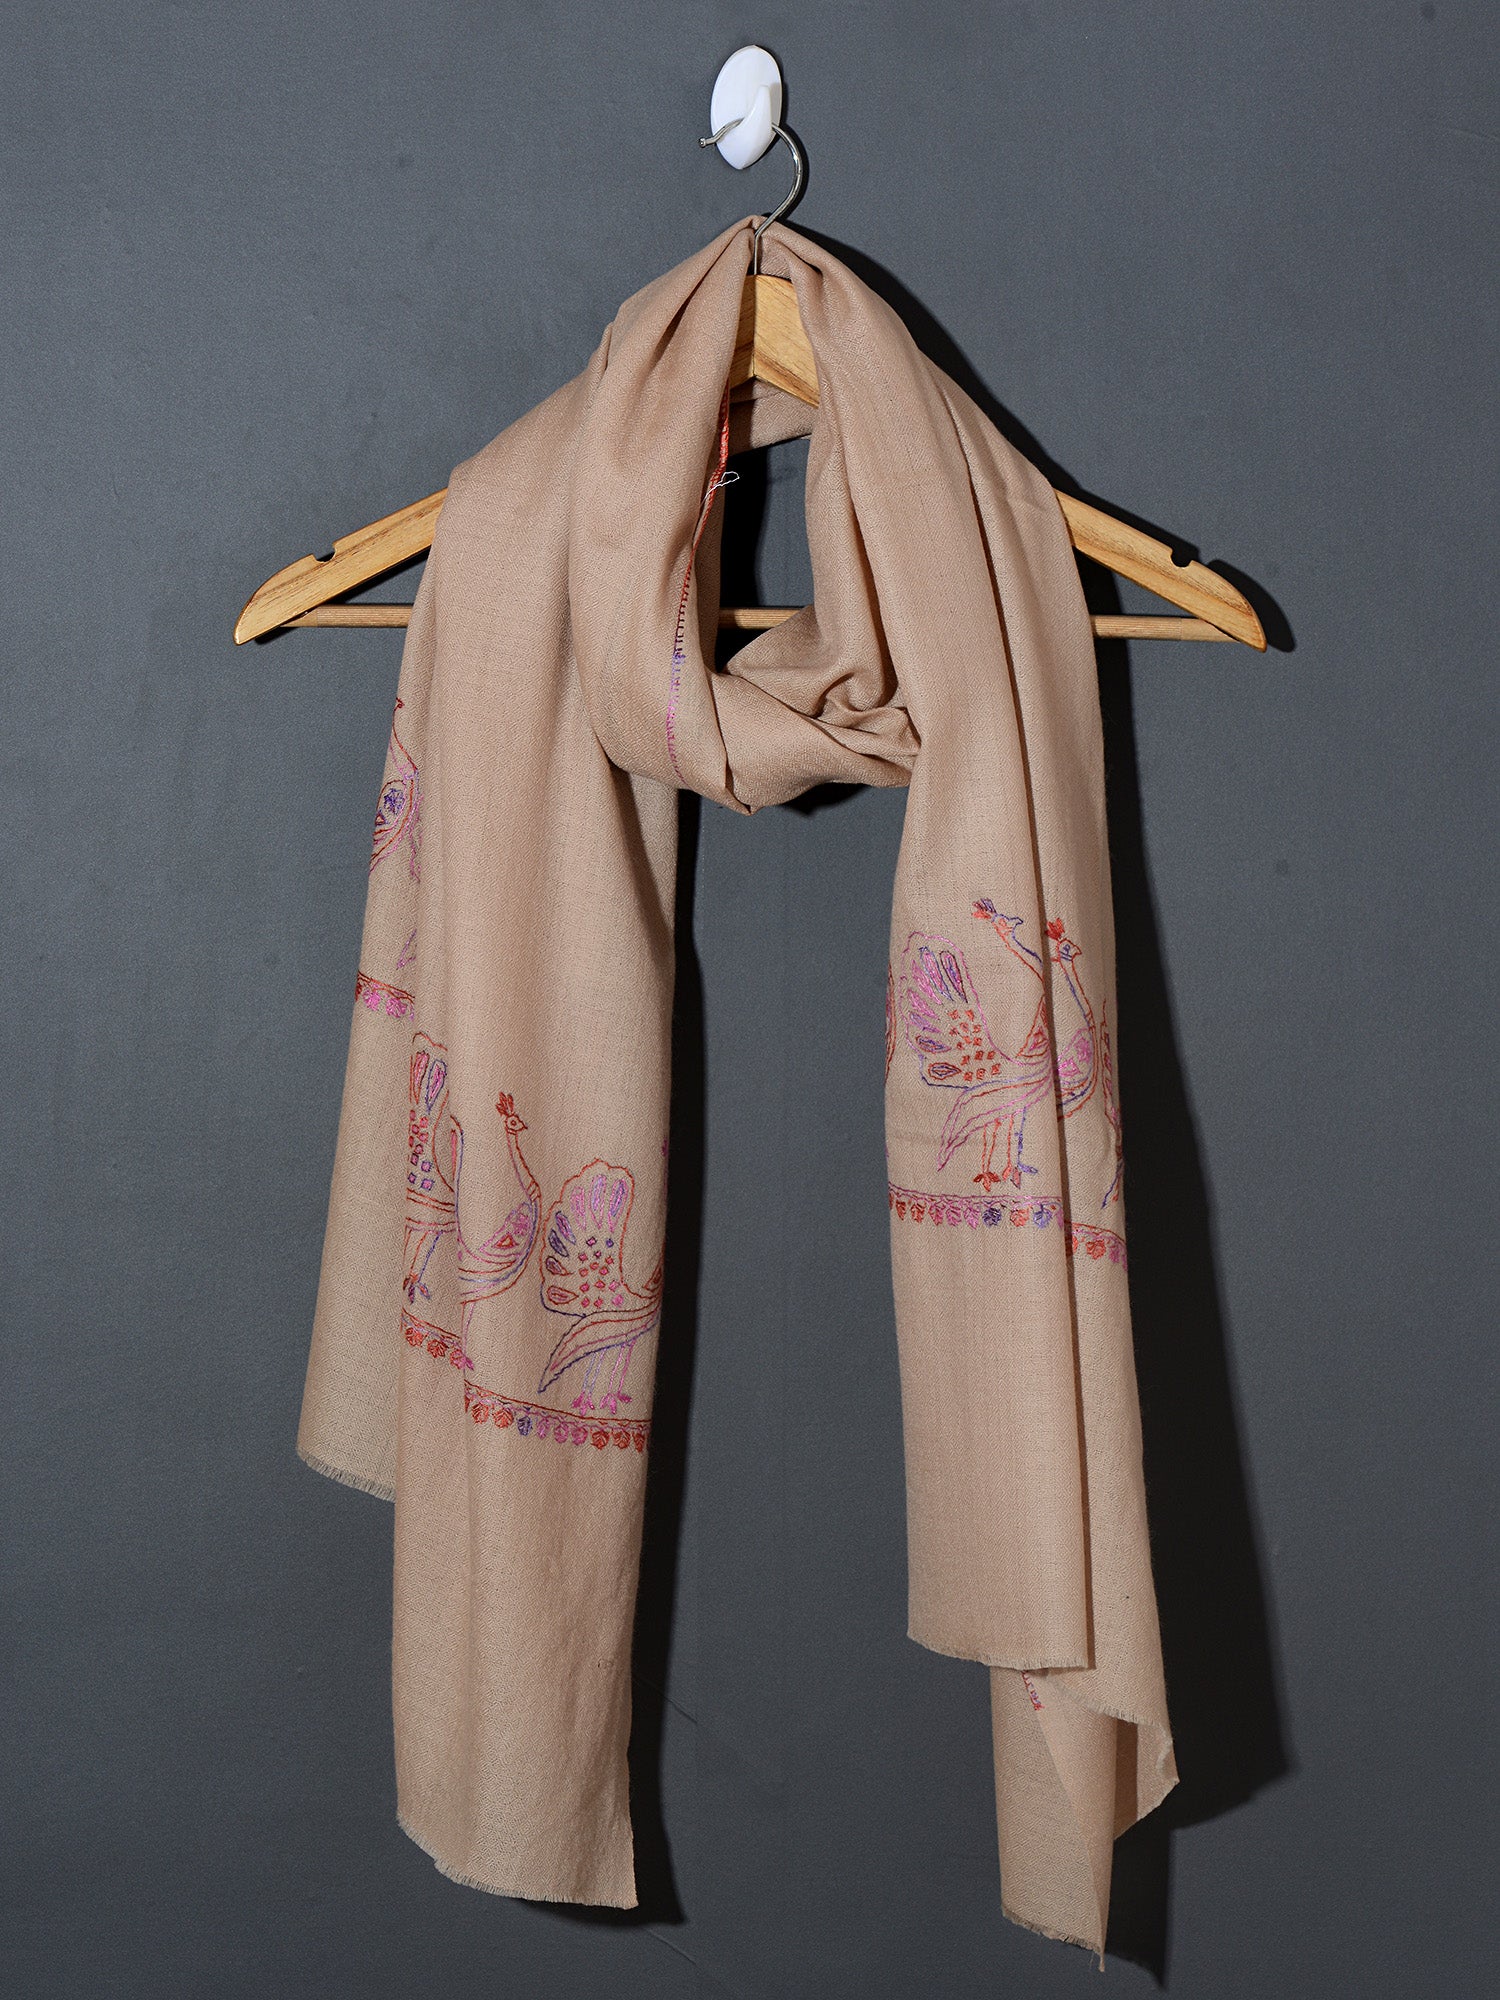 MAYURA, the Peacock Magnificent Hand Embroidered Stole -Powder Pink